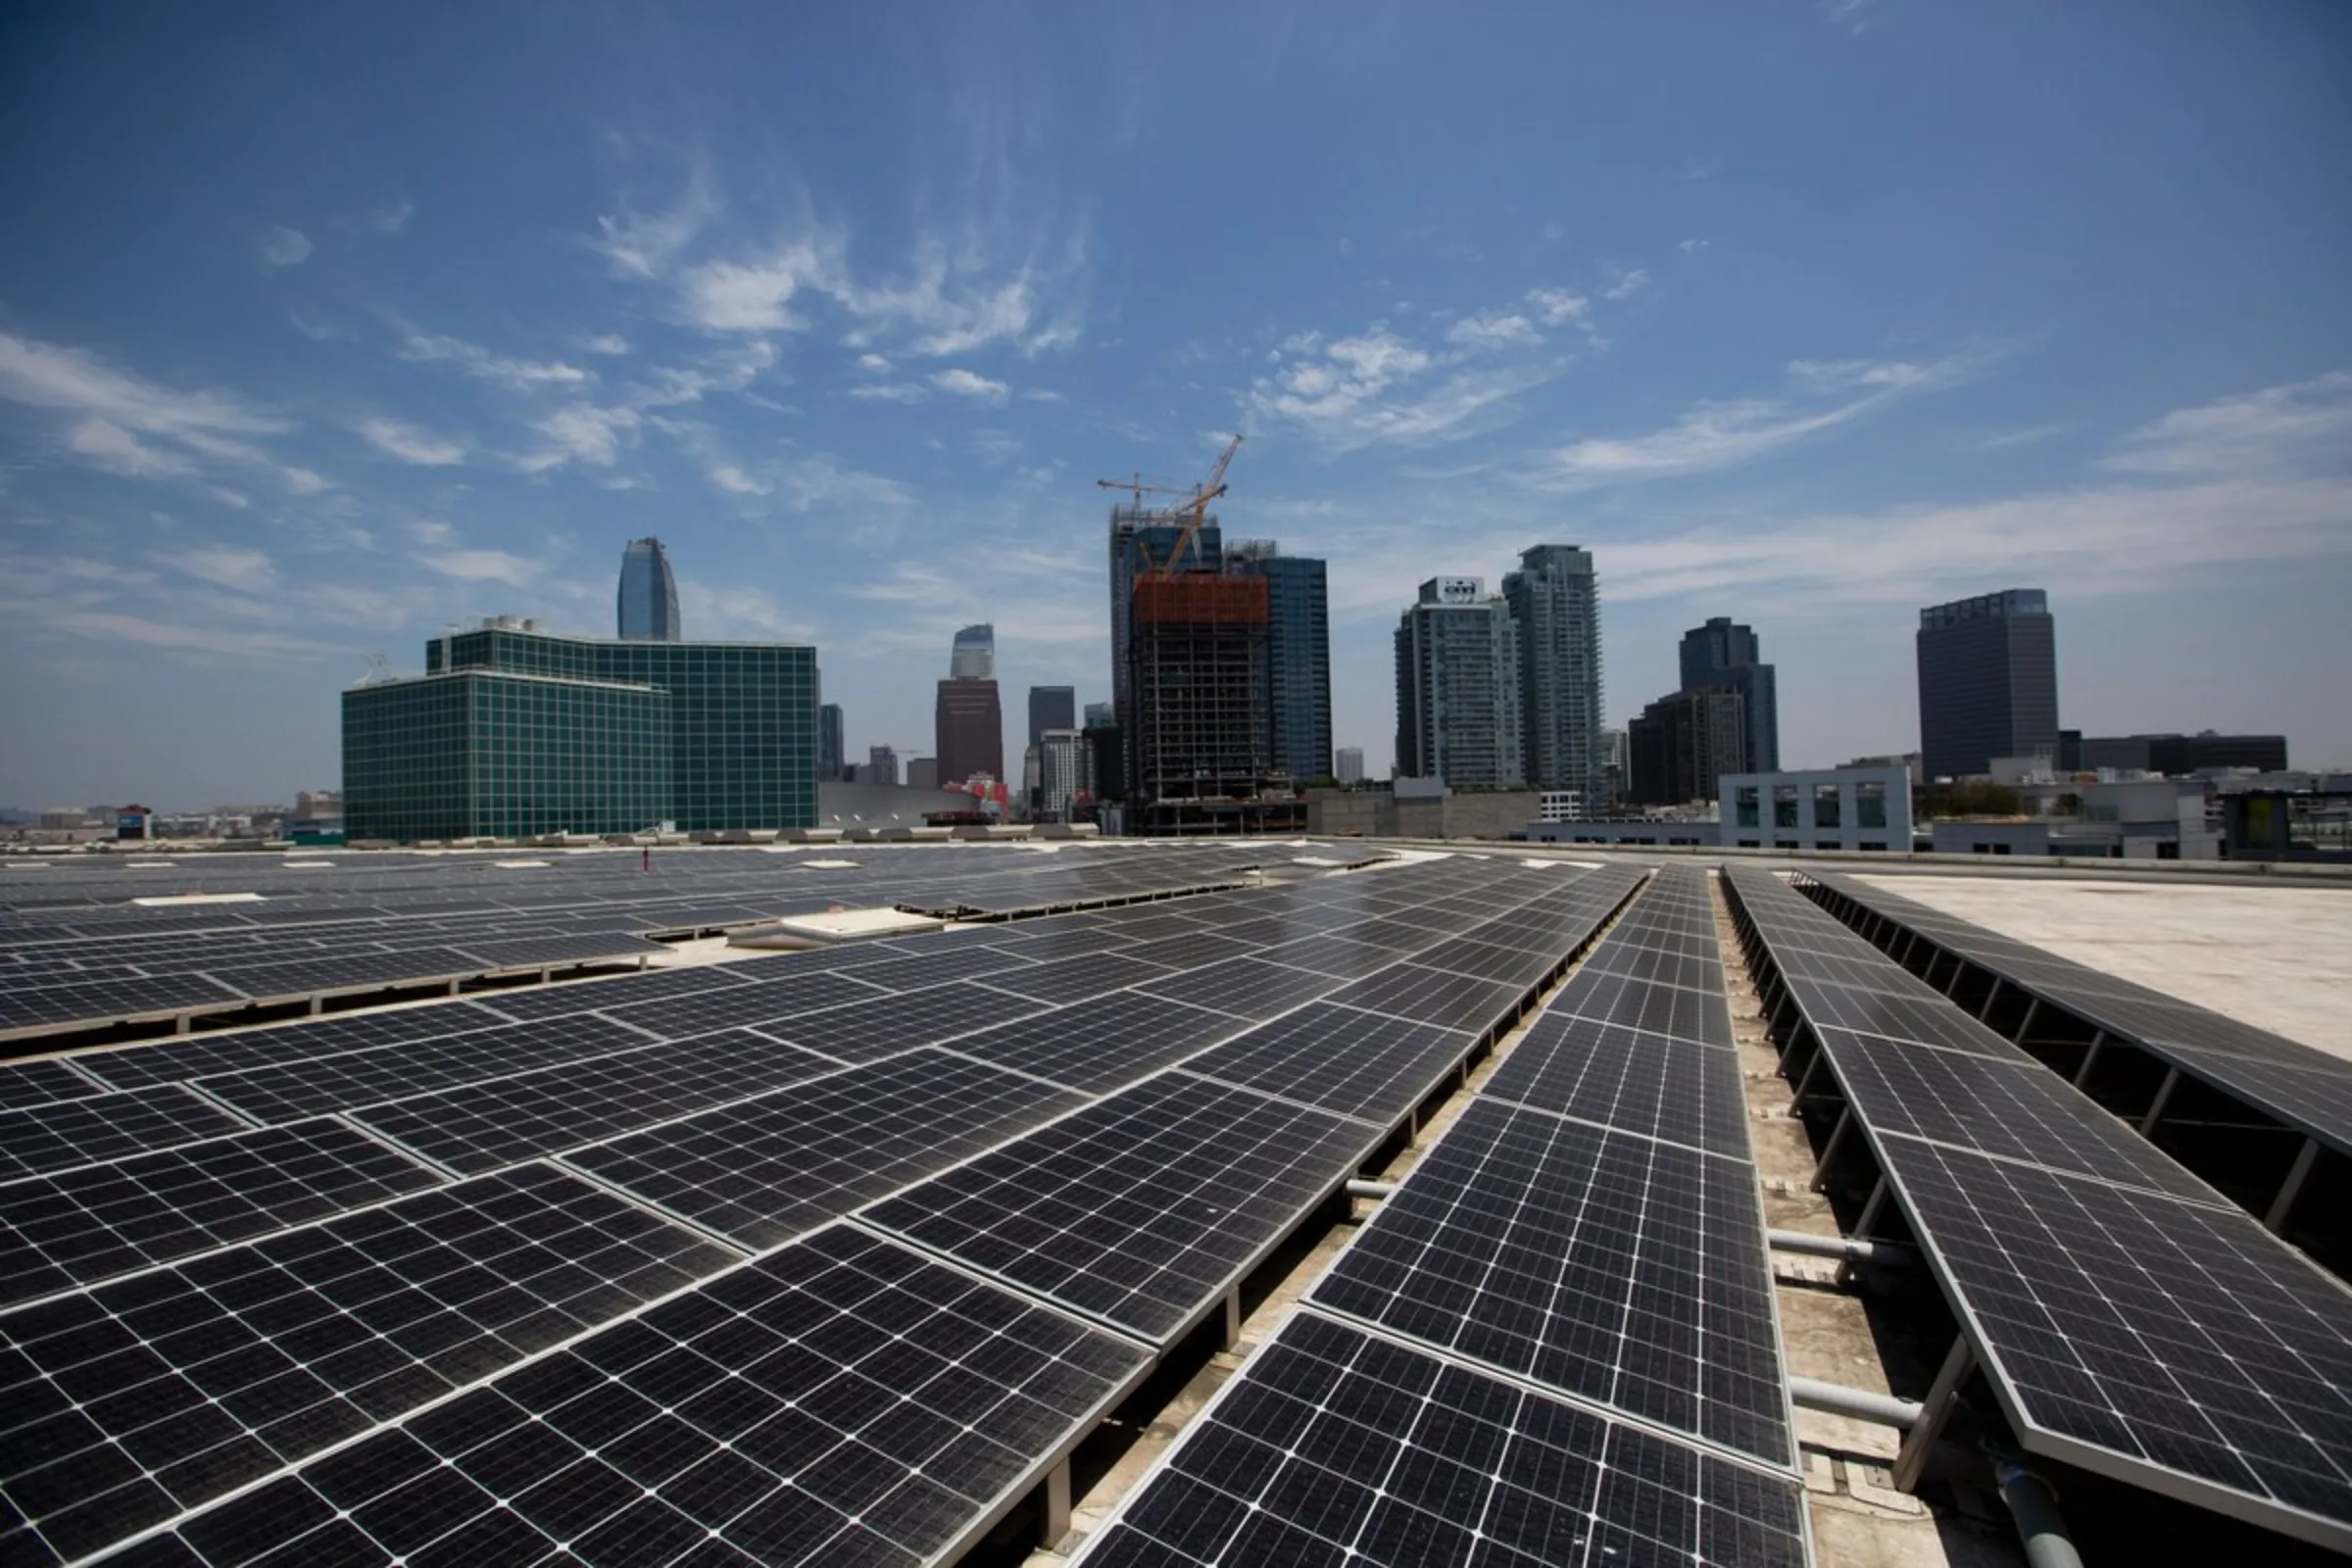 Solar panels cover the rooftop of the Convention Center in downtown Los Angeles, California, May 28, 2021